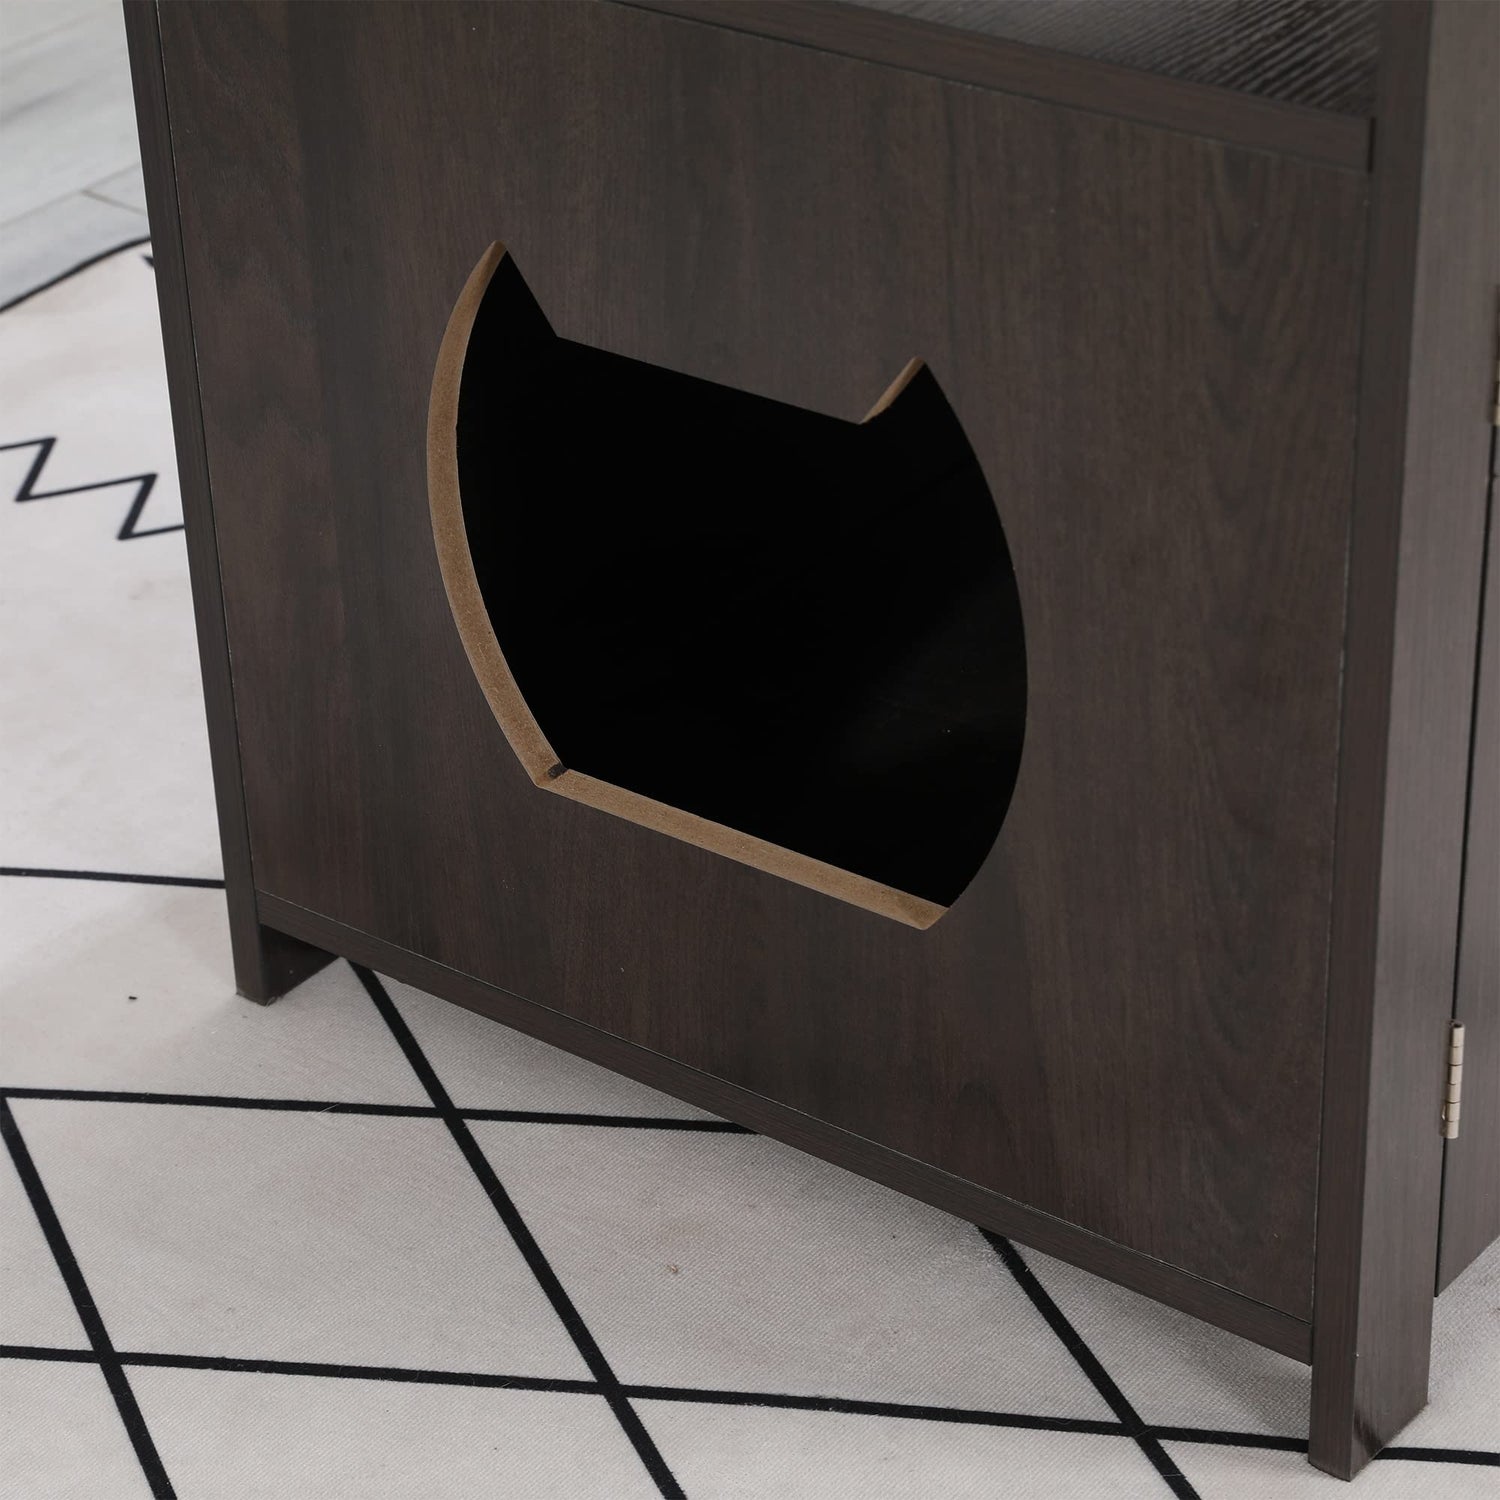 Dicoly 30 Inches Wooden Cat Litter Box Enclosure Furniture Table Wooden Cat Litter Box Enclosure Furniture with Adjustable Interior Wall Large Tabletop for Nightstand